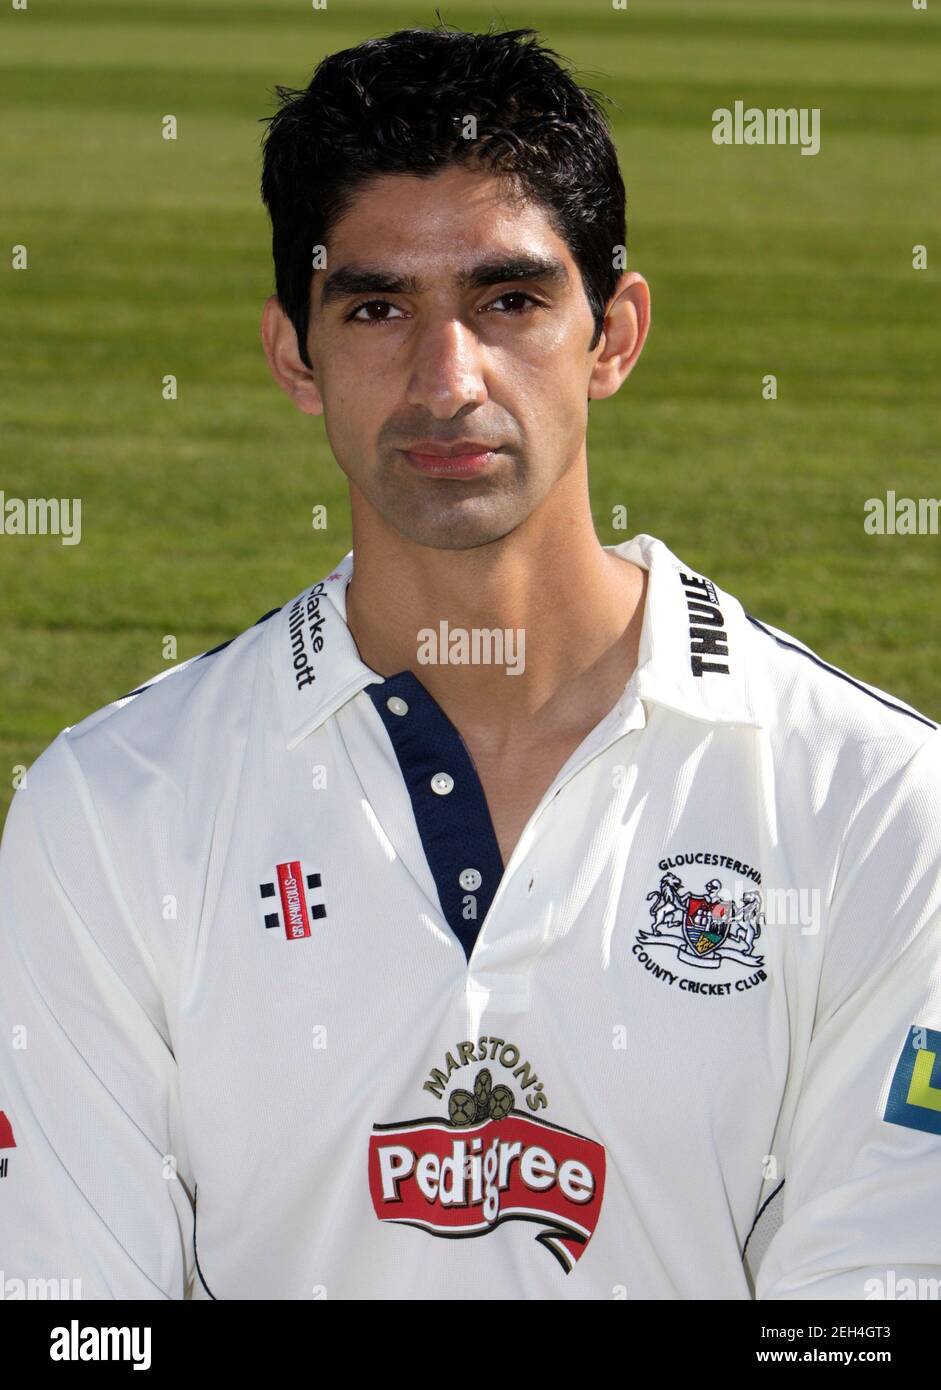 Cricket - Gloucestershire CCC Photocall 2010 - The County Ground, Bristol - 8/4/10  Gemaal Hussain  Mandatory Credit: Action Images / Peter Cziborra Stock Photo